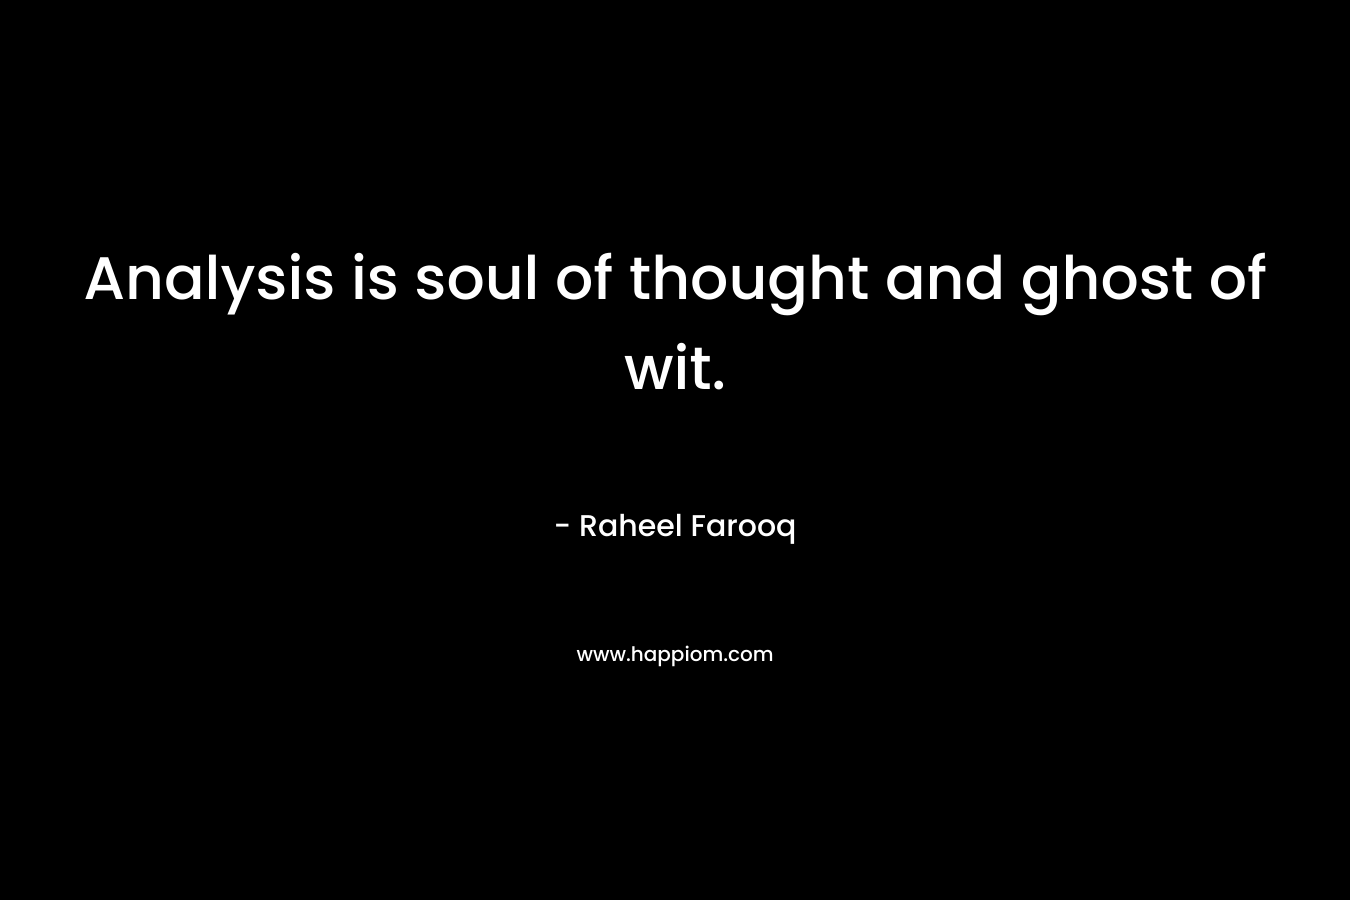 Analysis is soul of thought and ghost of wit. – Raheel Farooq